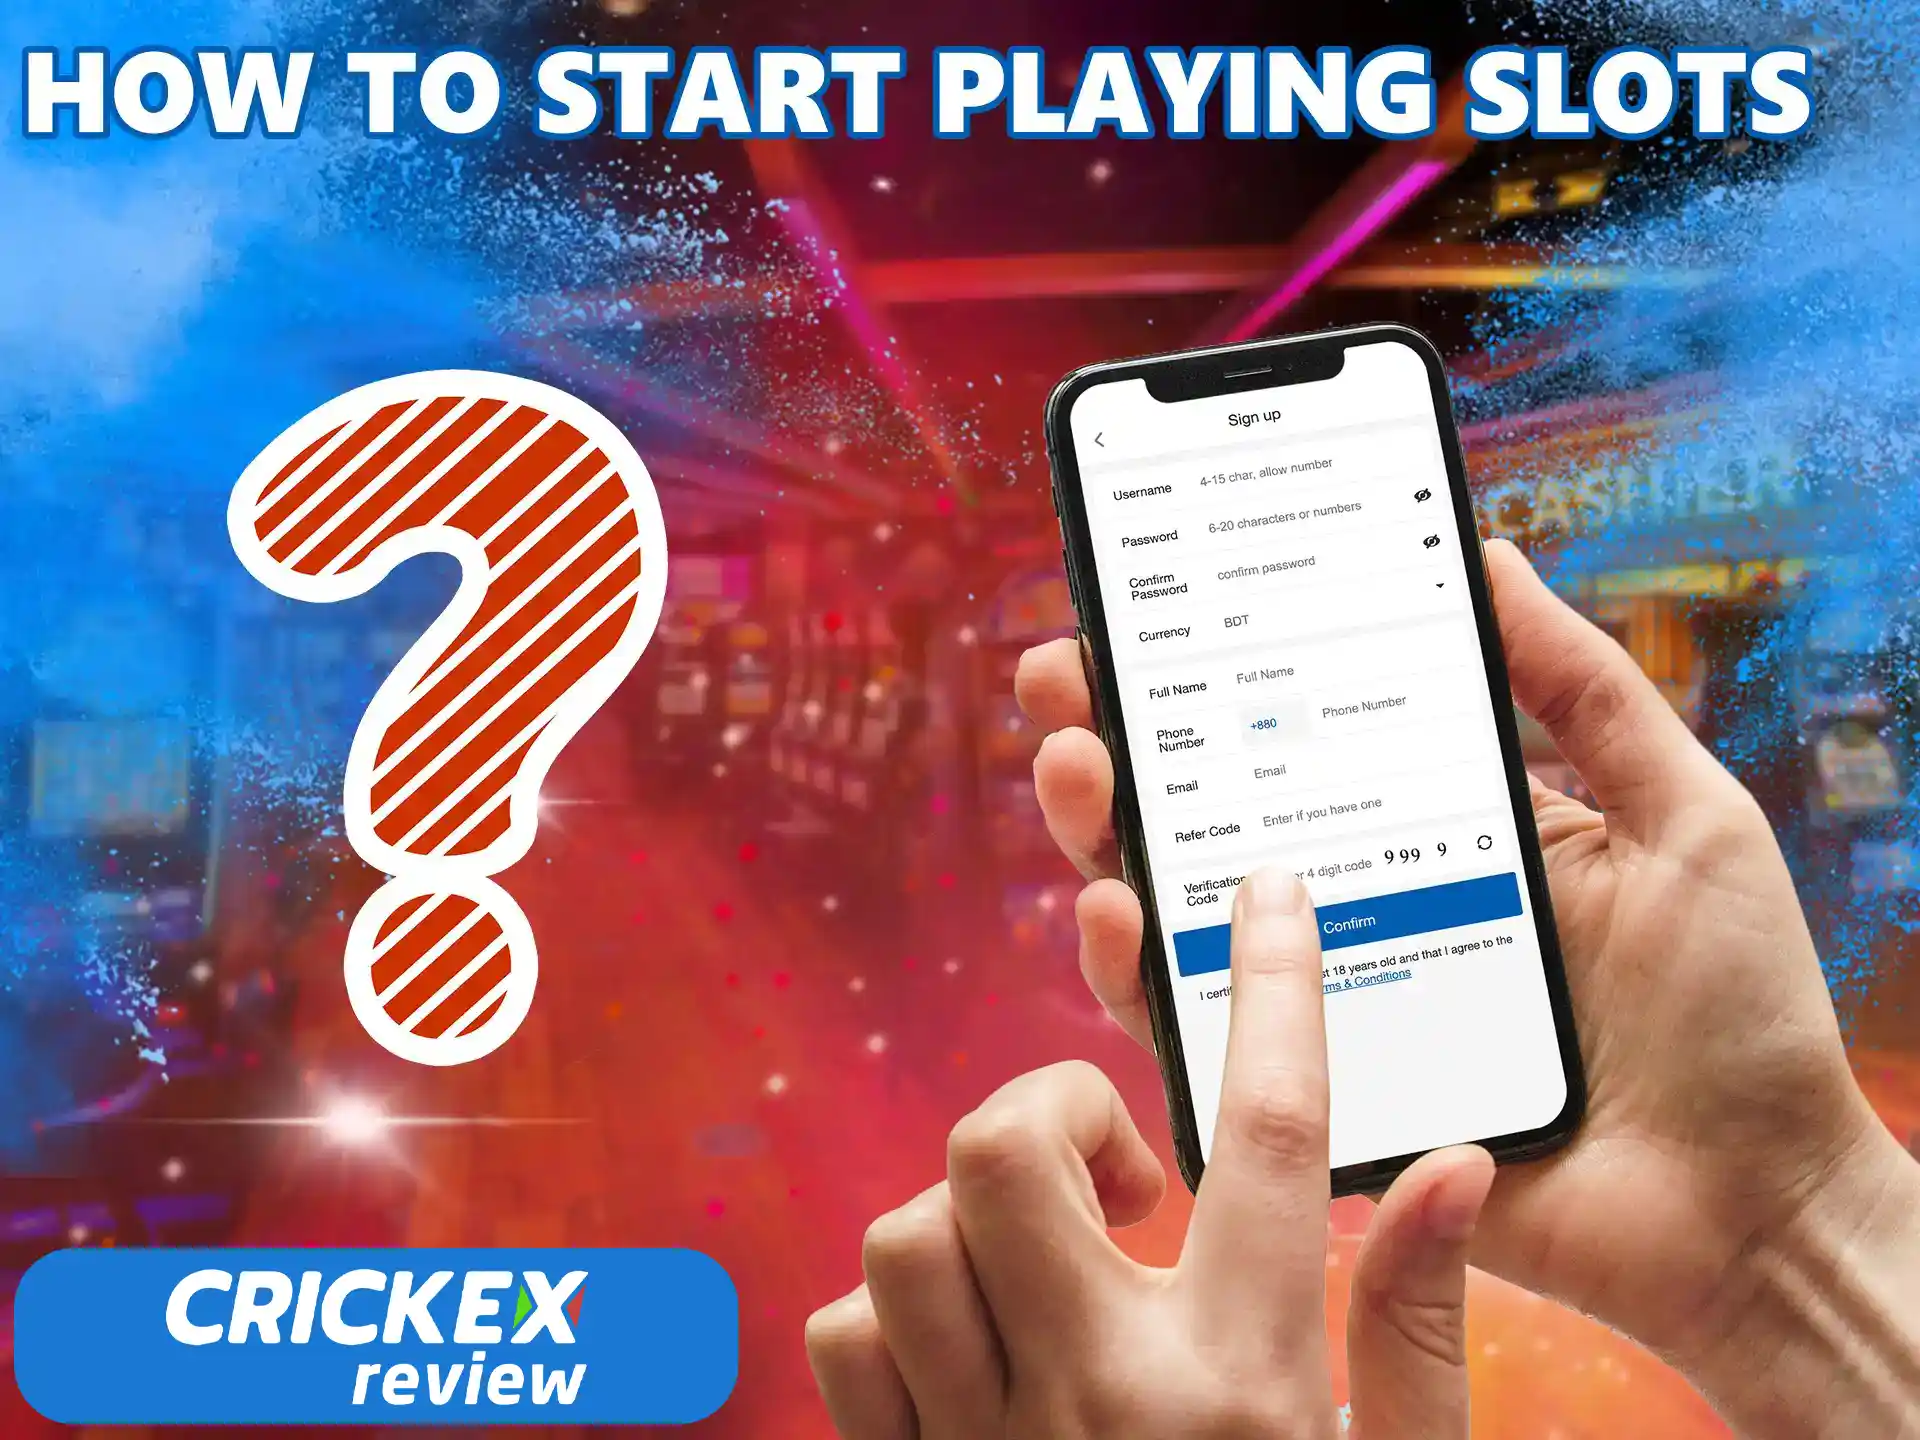 To get a head start in the game you must create an account with Crickex and fund your virtual account.